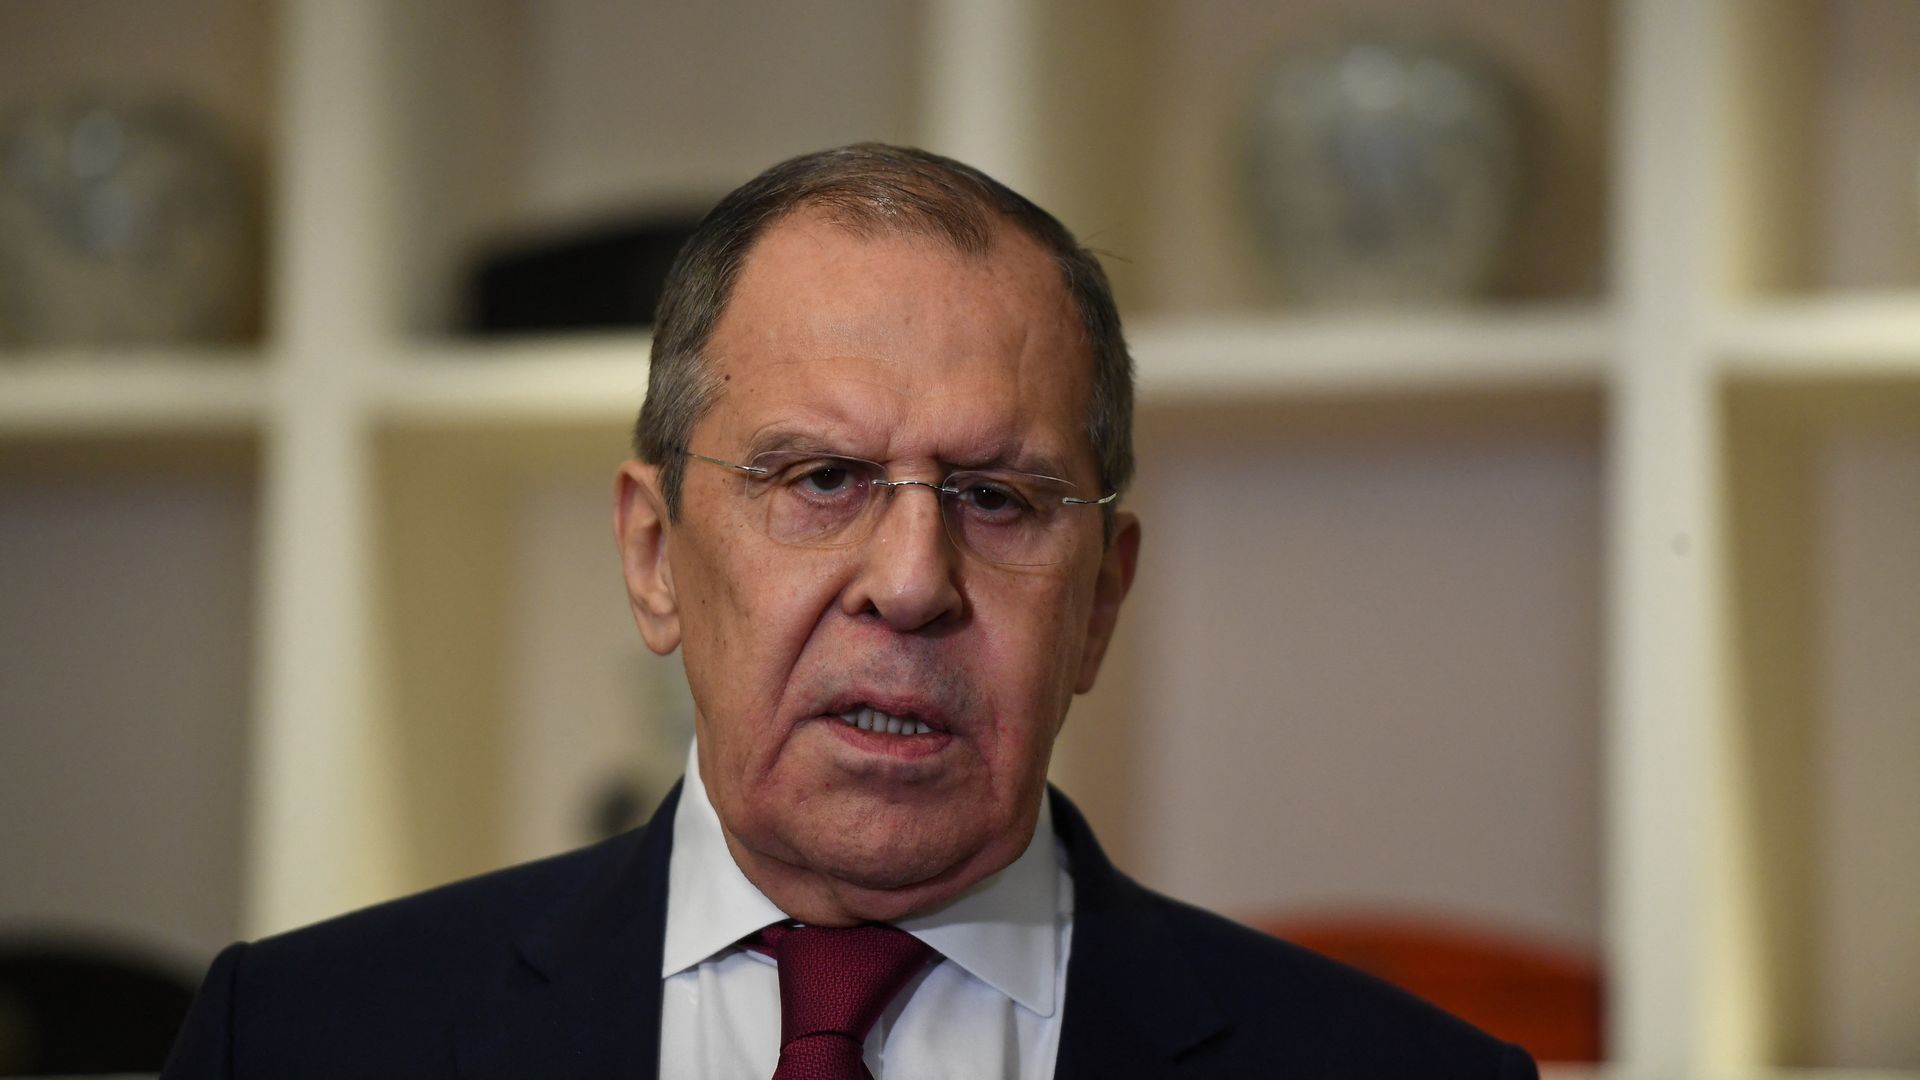 Russian Foreign Minister Sergey Lavrov. Photo: Nhac Nguyen/AFP via Getty Images